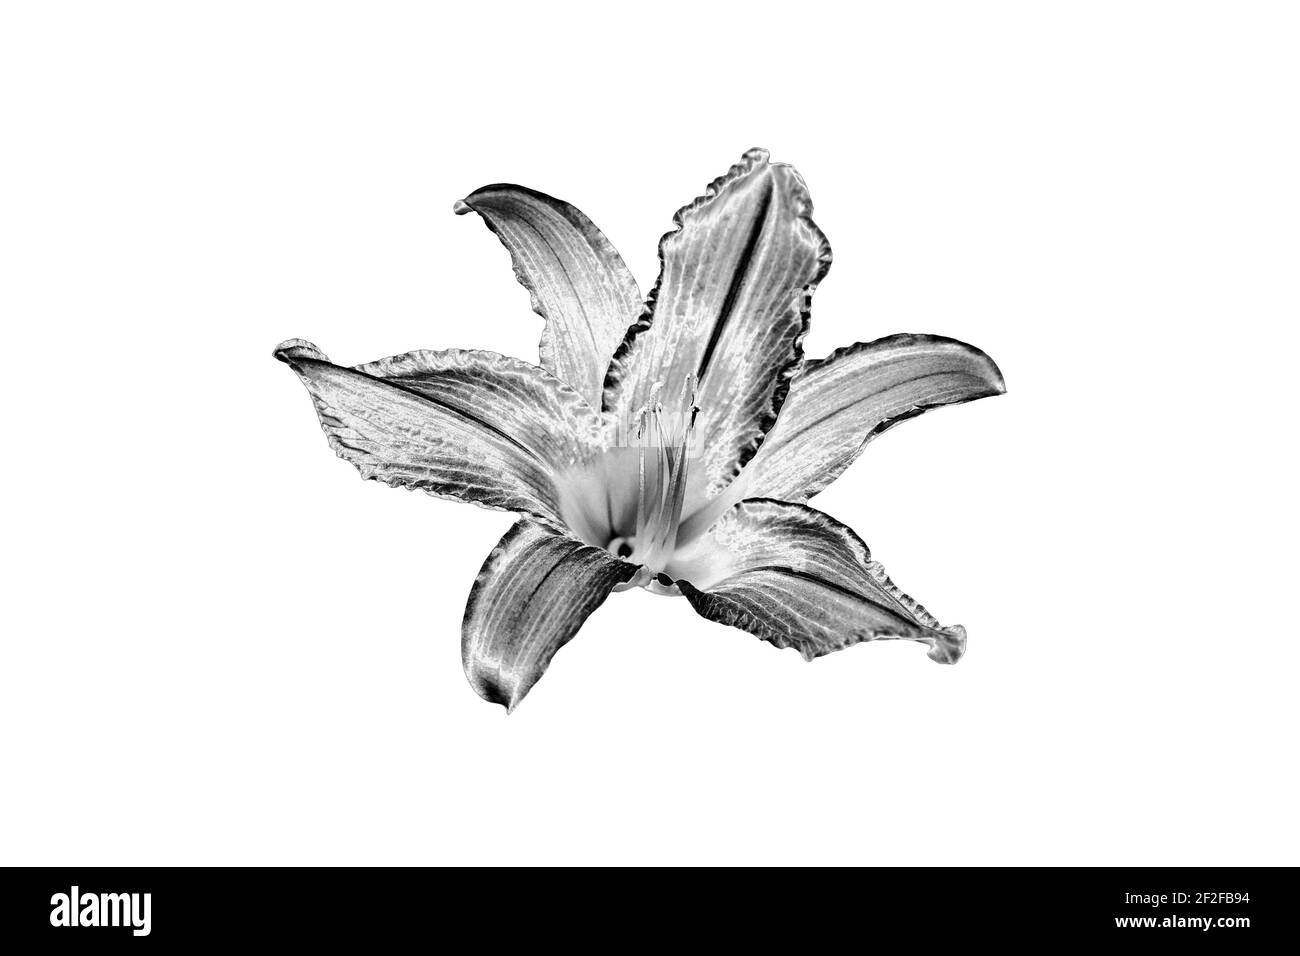 Pen & Ink stippling illustration of a Day Lily Stock Photo - Alamy